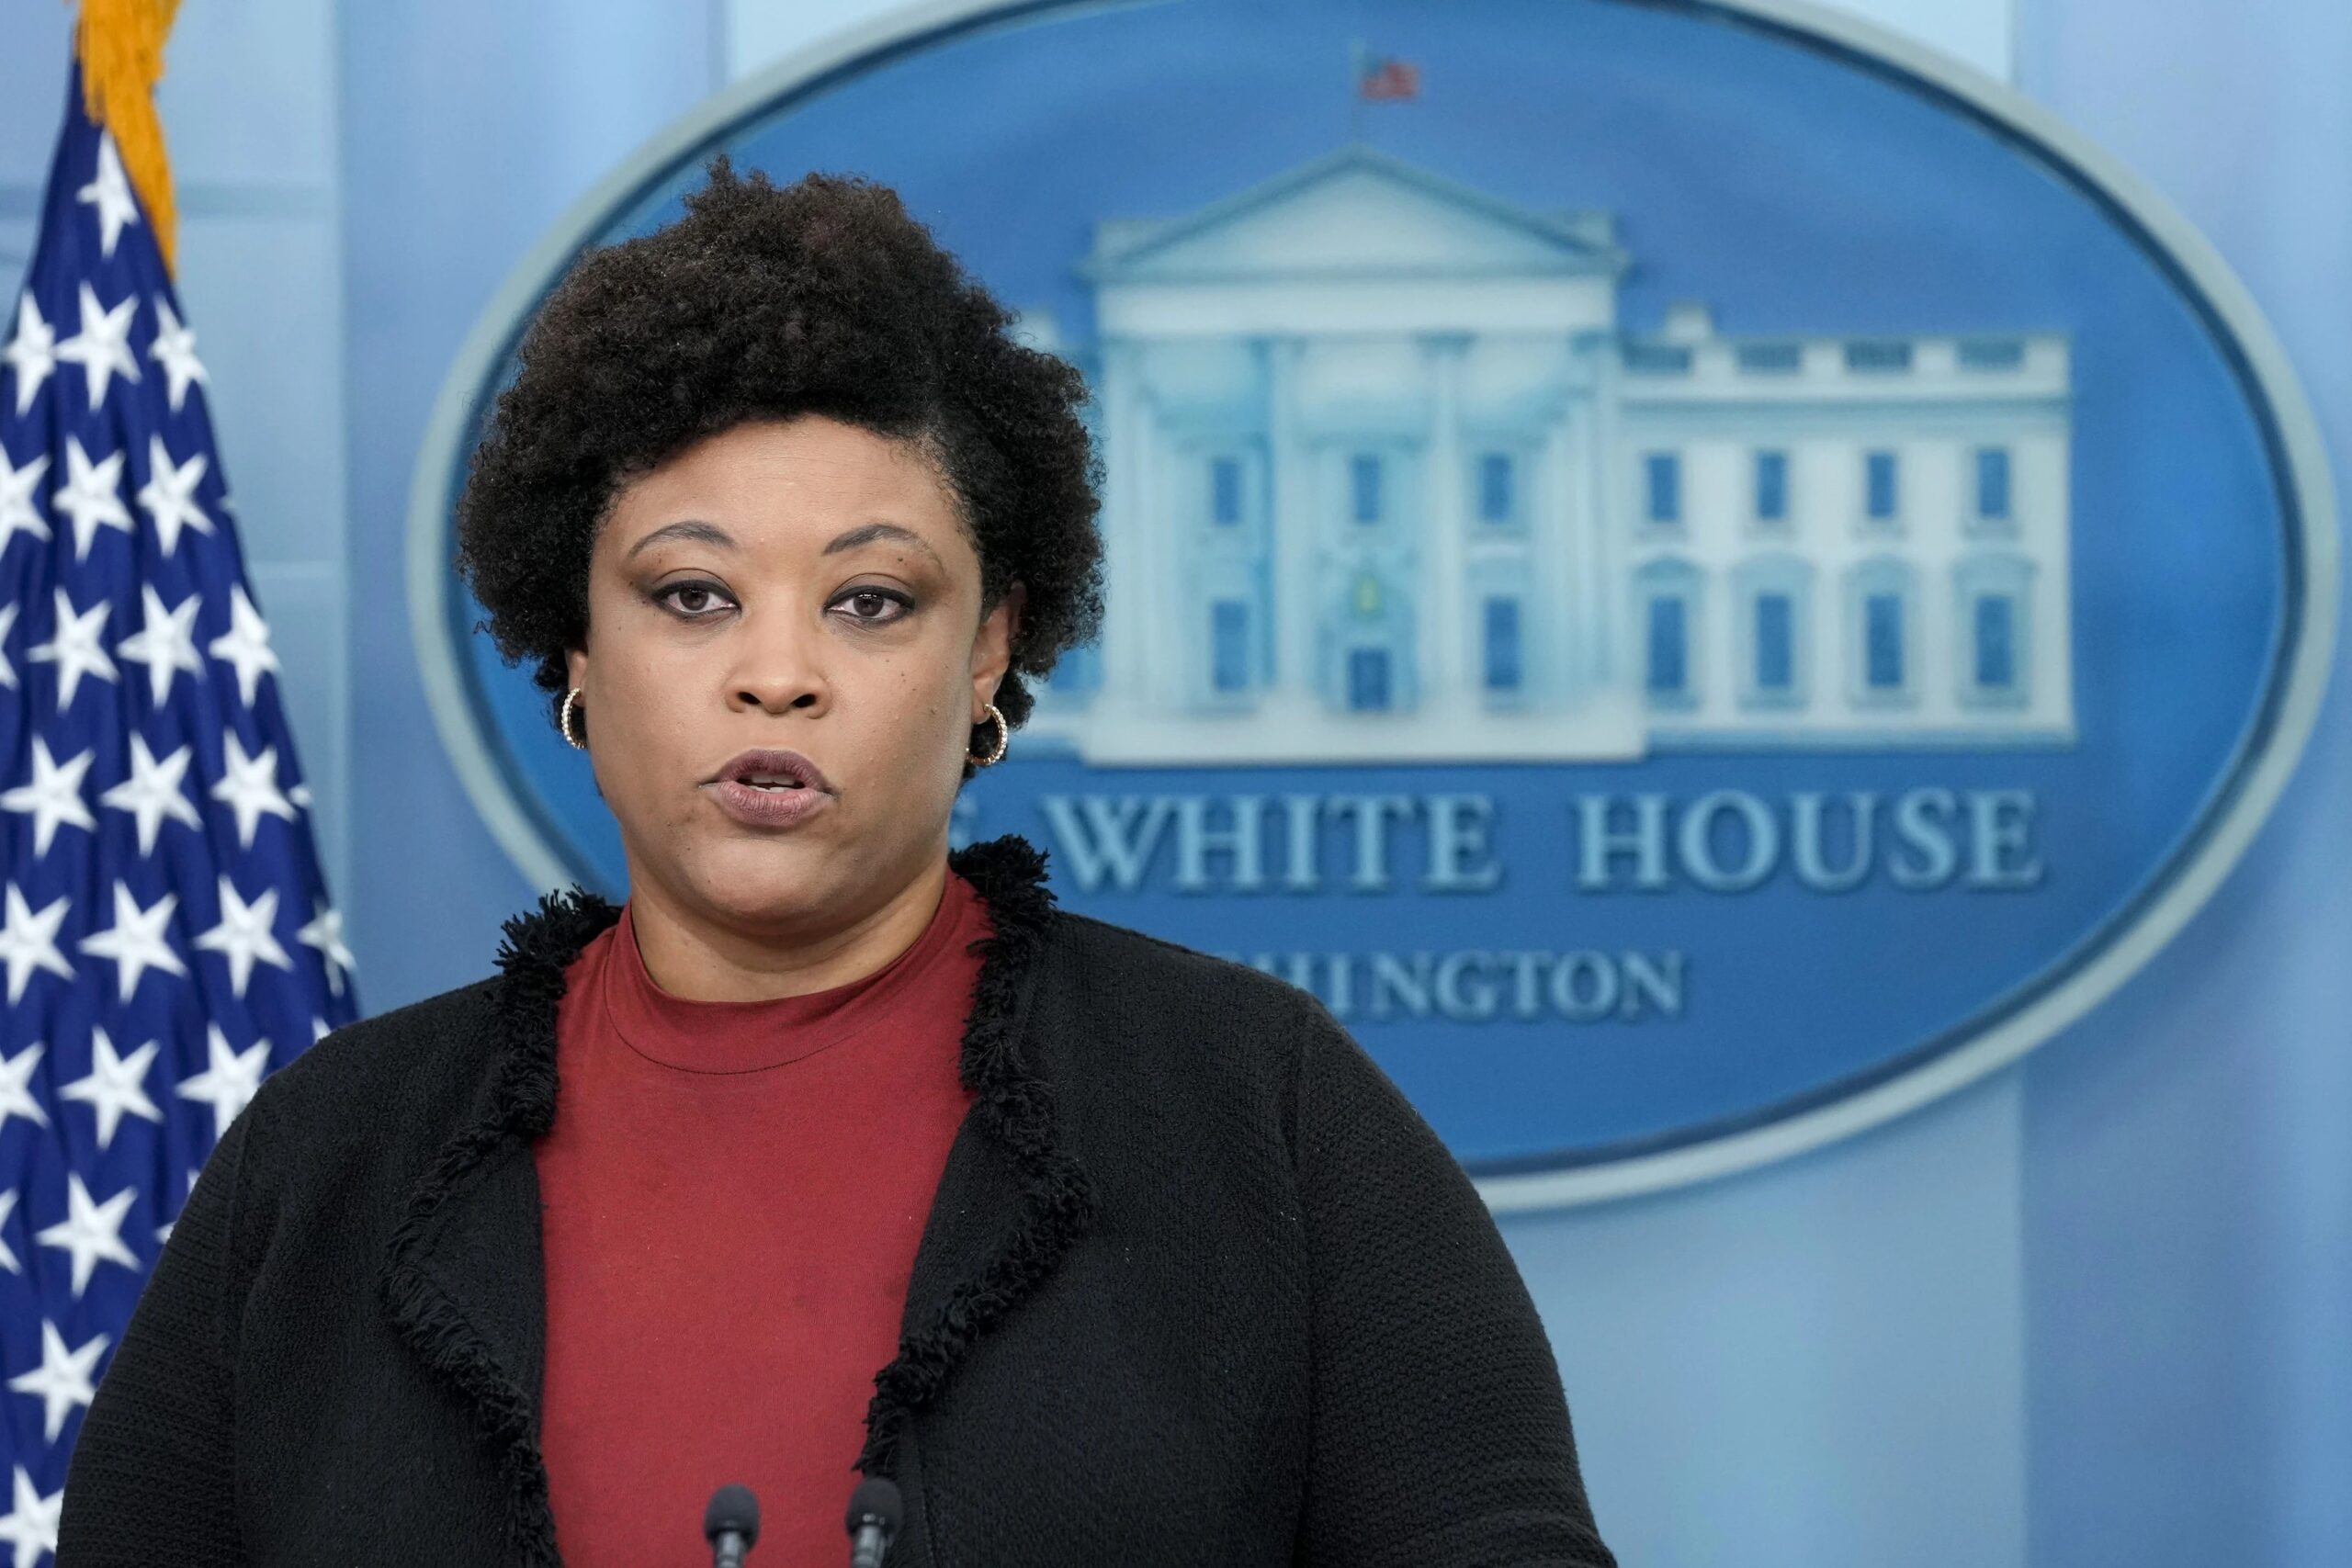 Office of Management and Budget director Shalanda Young speaks about the possible government shutdown during the daily briefing at the White House in Washington